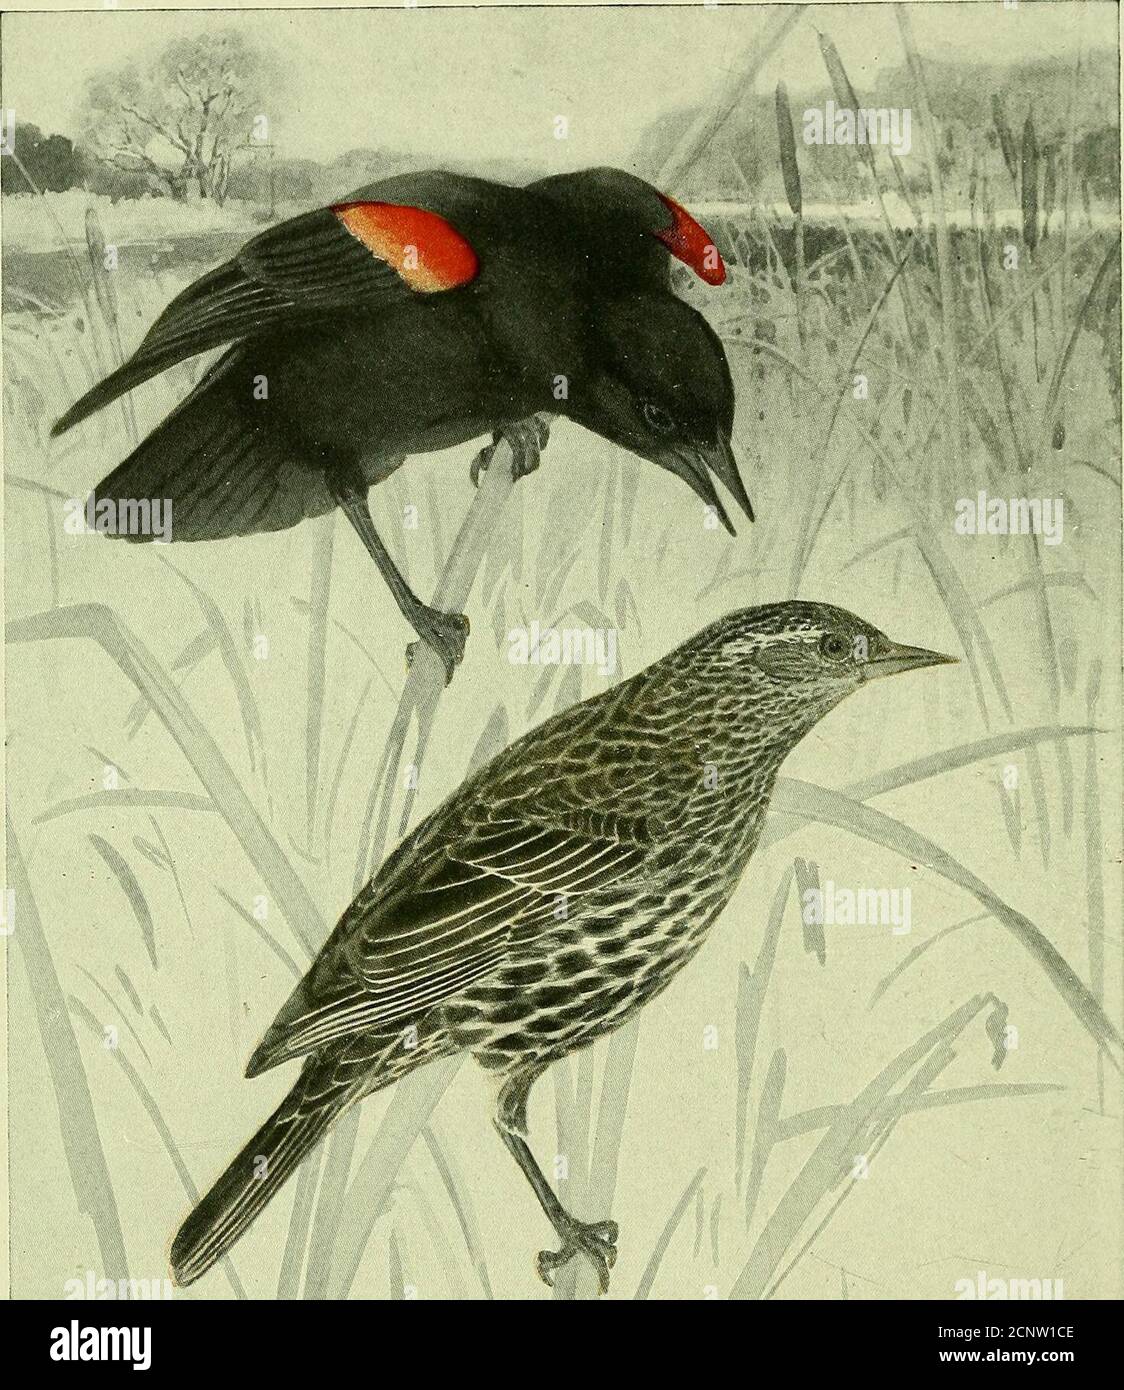 . The oriole : official organ of the Somerset Hills Bird Club . rd Club Membership 2 List of Officers and Members 3 Red-winged Blackbird (coloredplate) to face 3 Opportunities of Bef^nardsville, by William S. Post 4 A Few Friendly Foreigners ifi Feathers, by Lilian Gillette Cook 8 House Wren (colored plate) to face 9 The Destruction of Bird Life in Bernardsville by Meredith H. Pyne 13 JVljy Study Birds f Its Practical and Esthetic Value, /^y John Dryden Kuser 15 Nesting of the Merganser in 1913, by William S. Post 18 Intensive Field Observation, by C. William Beebe 24 Bob White (coloredplate) Stock Photo